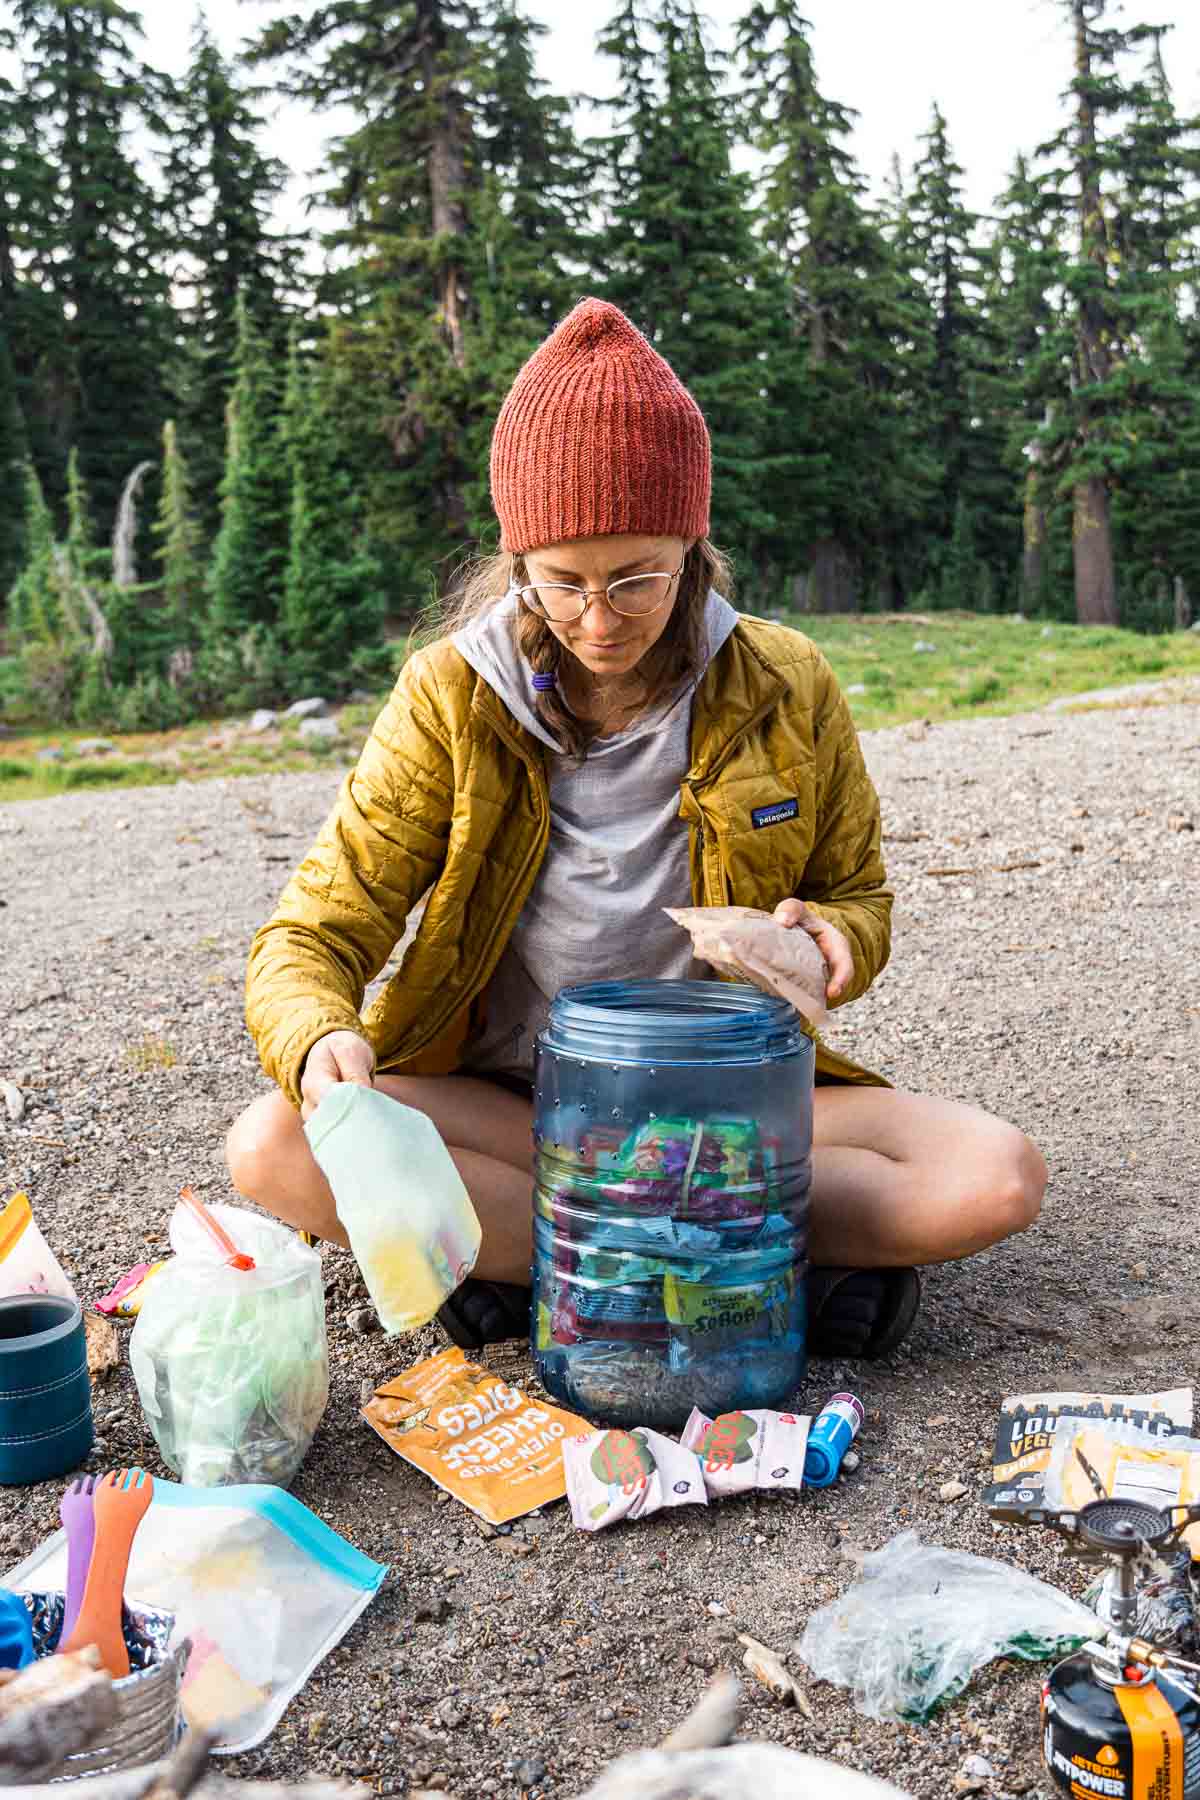 Megan is sitting on the ground with a bear canister in front of her. She is removing a backpacking meal from the canister.